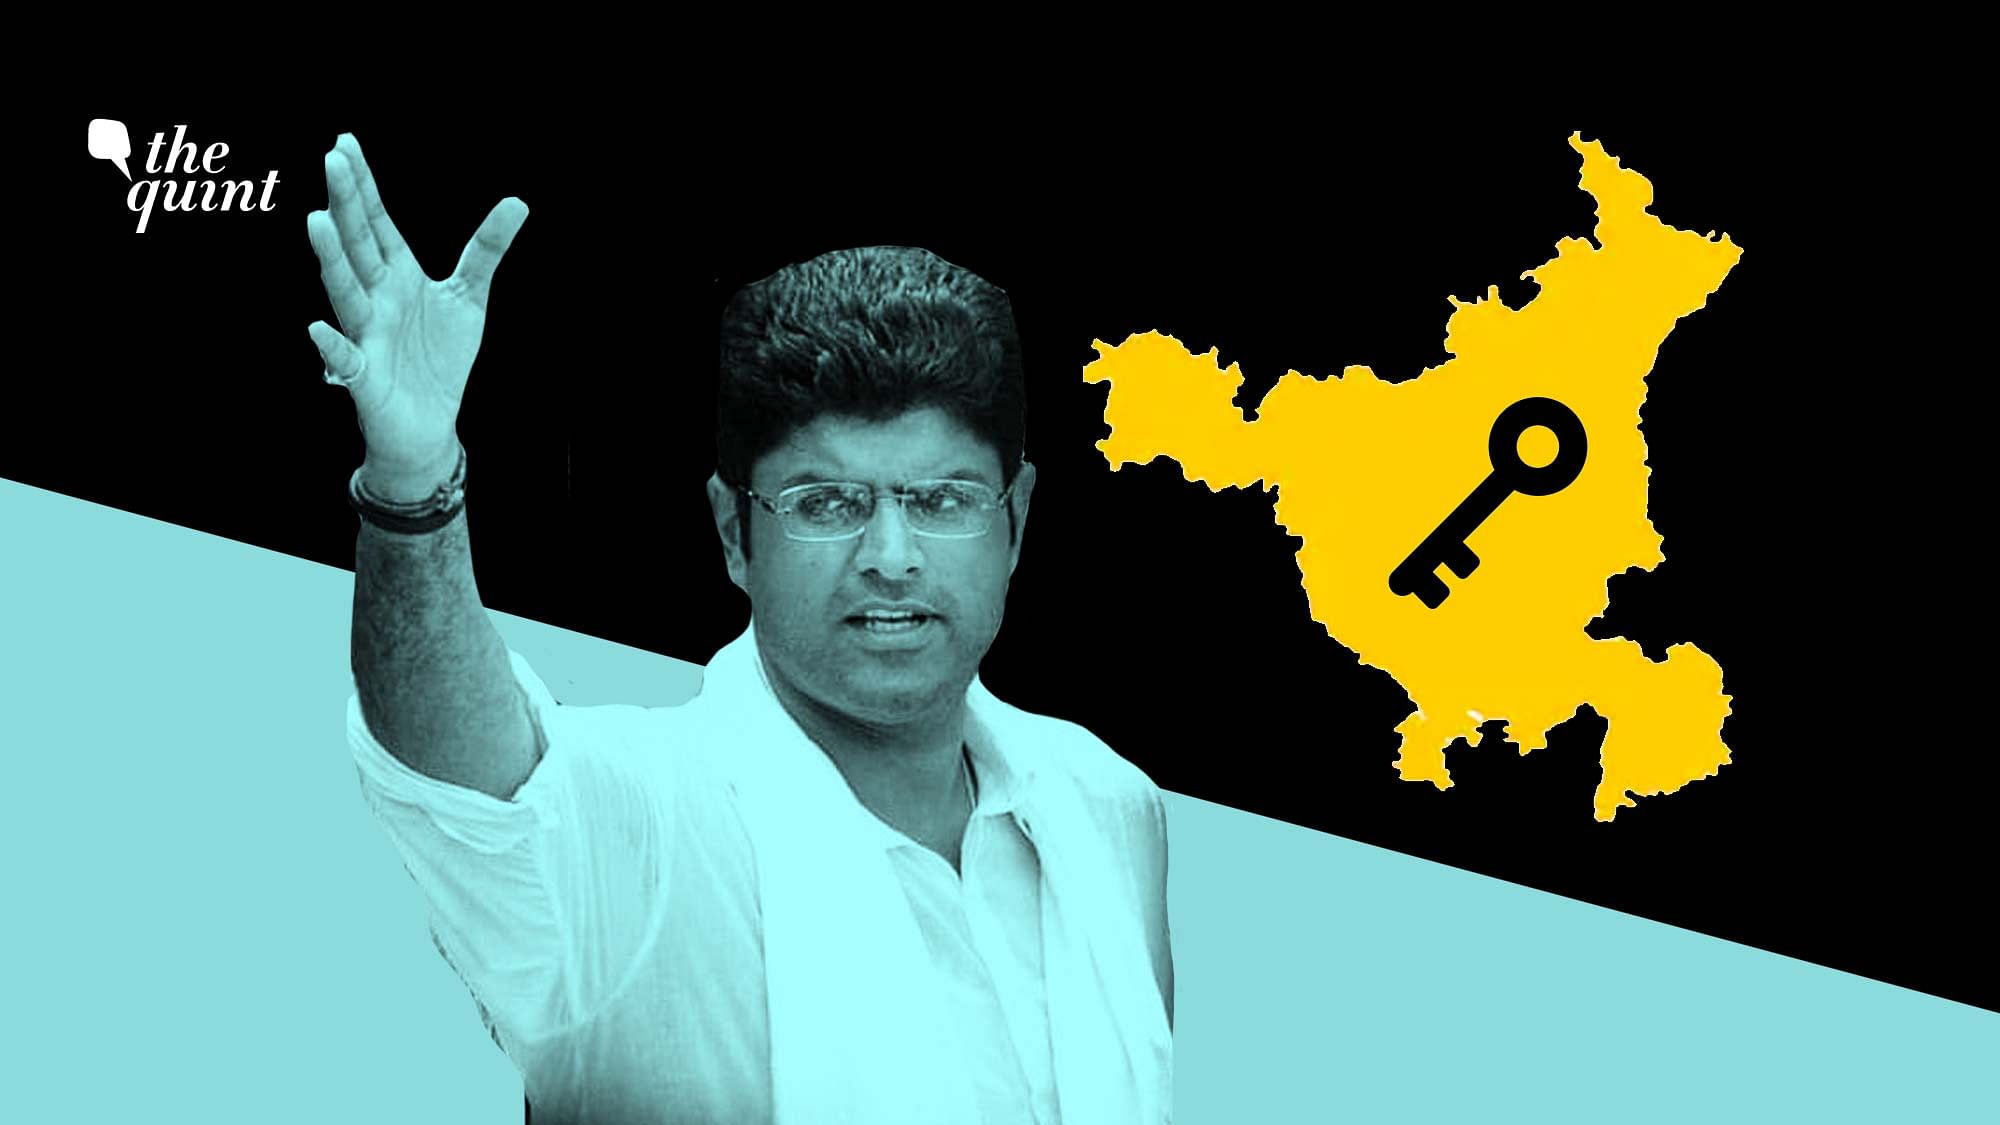 Dushyant is the youngest MP in India.